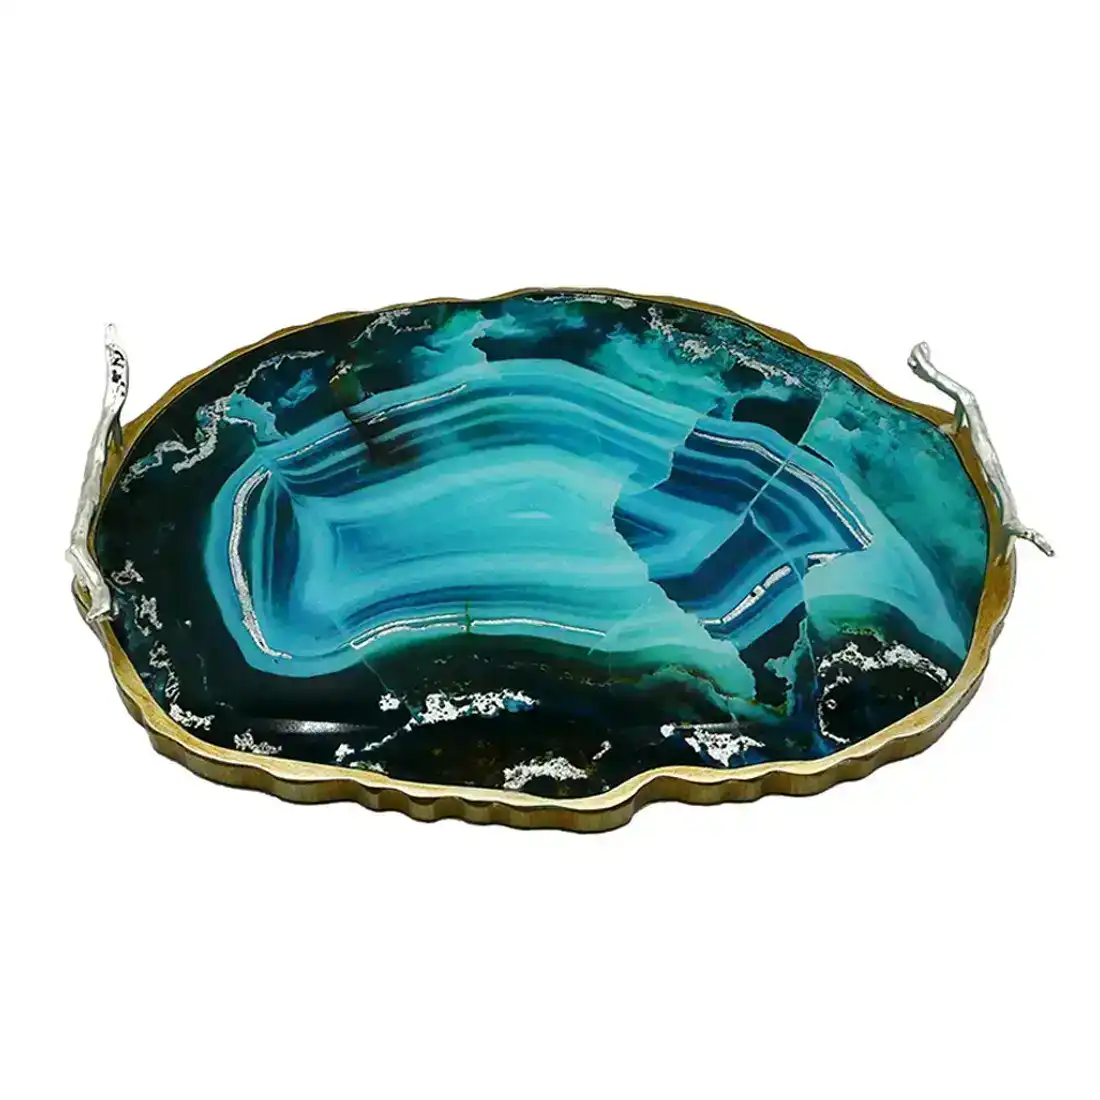 Charlie &amp; Co. Luxe Tray in Turquoise